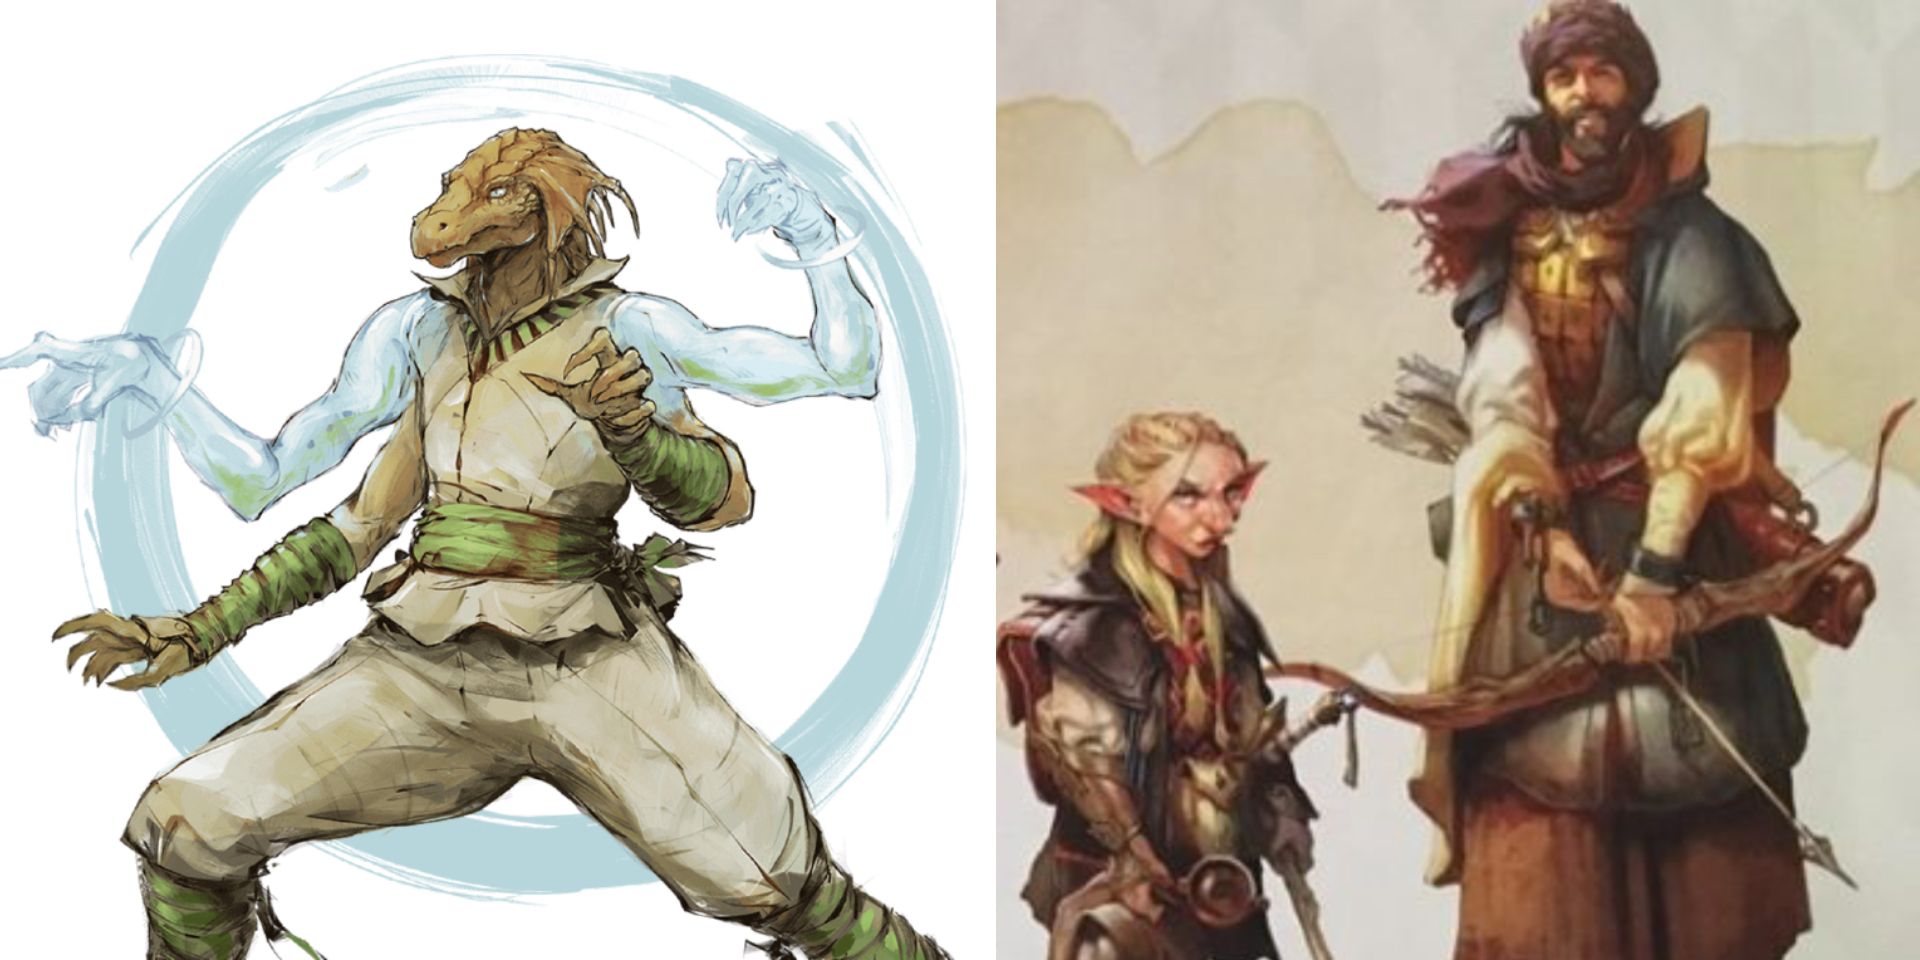 10. Monk Subclasses in Dungeons and Dragons - wide 3